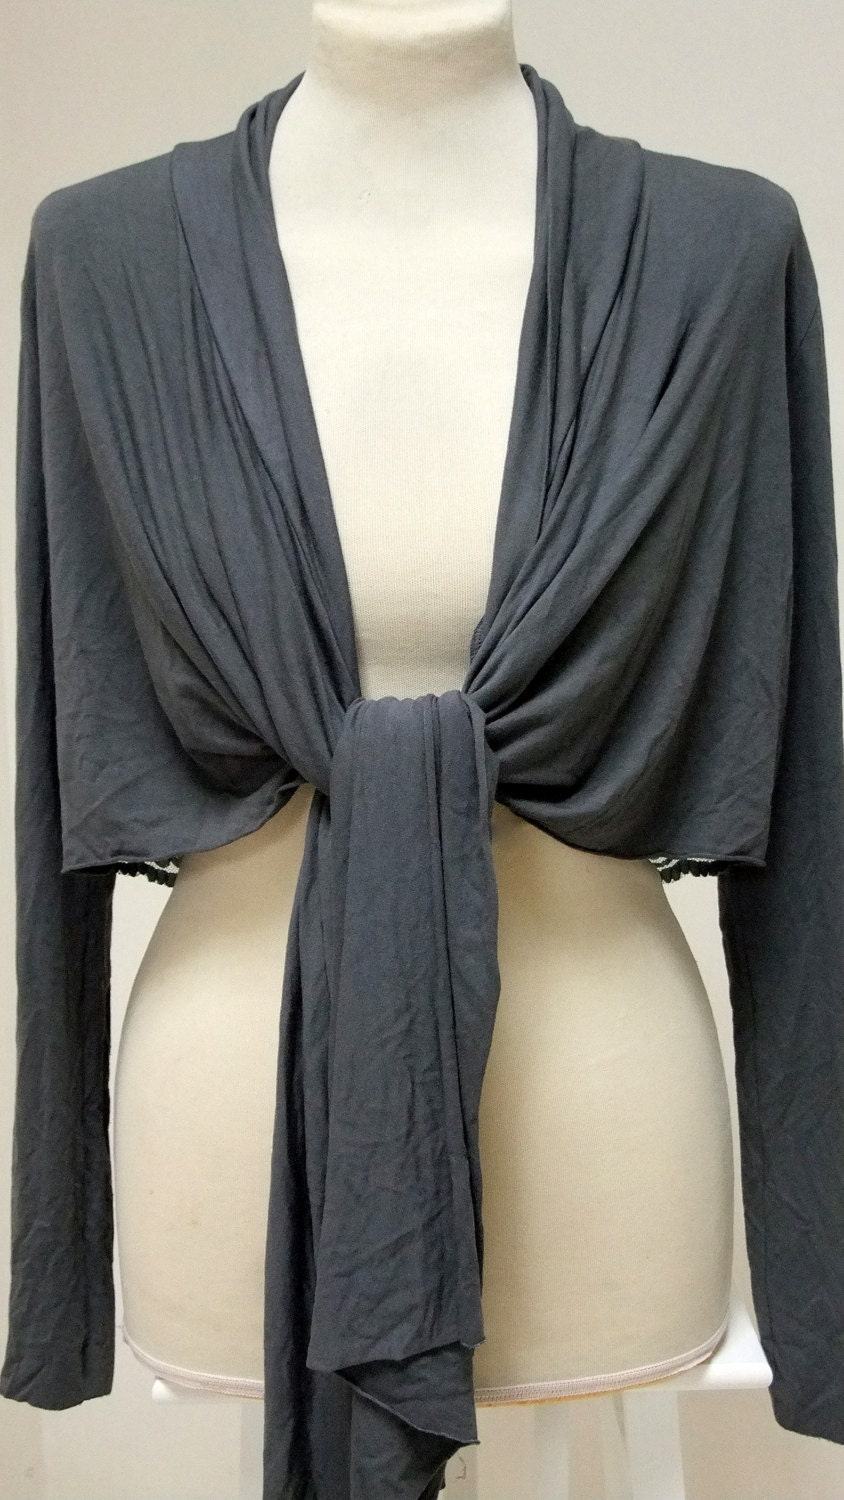 Batwing Shrug Gray Charcoal Tie Front Shrug Long Sleeve